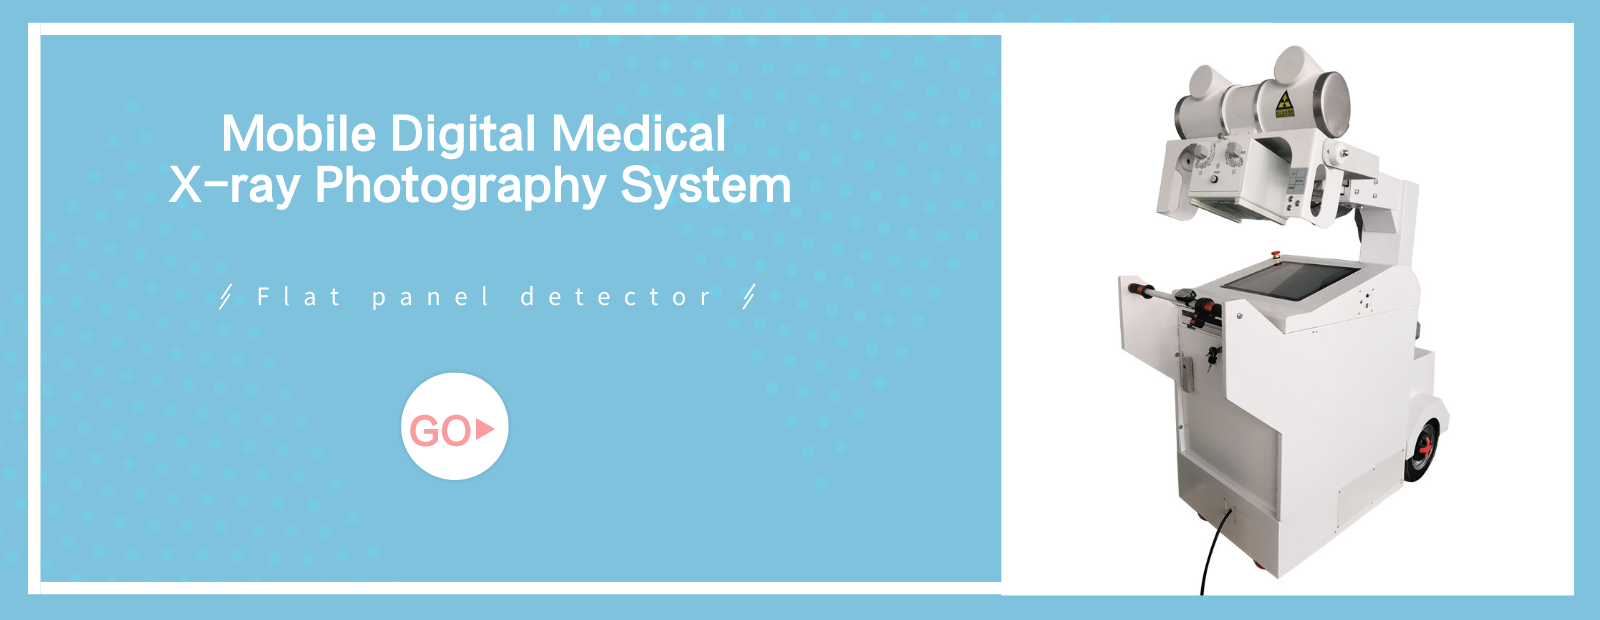 Mobile digital medical X-ray photography system